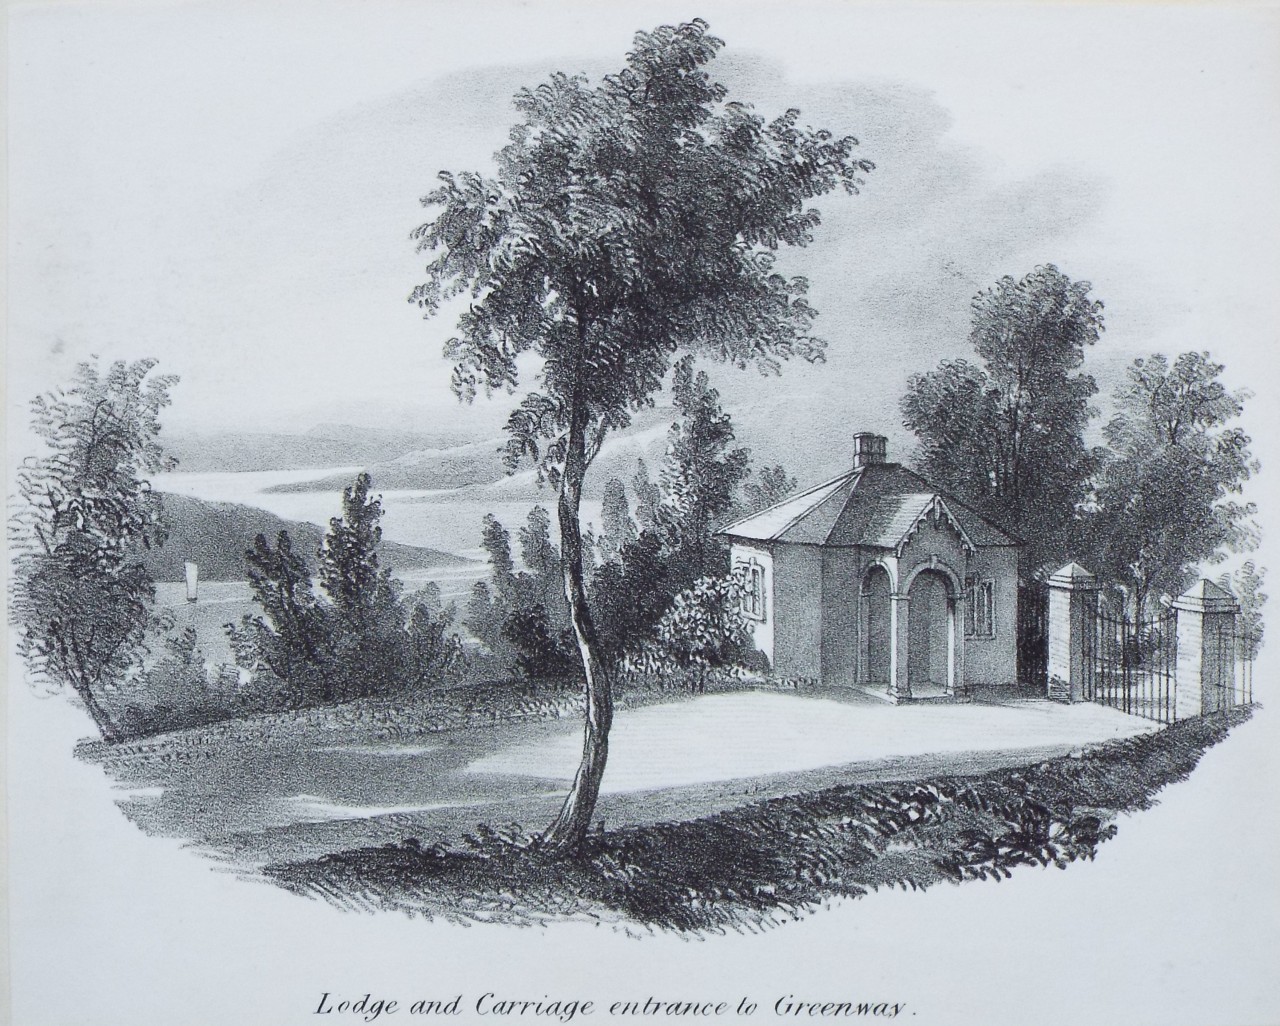 Lithograph - Lodge and Carriage entrance to Greenway.